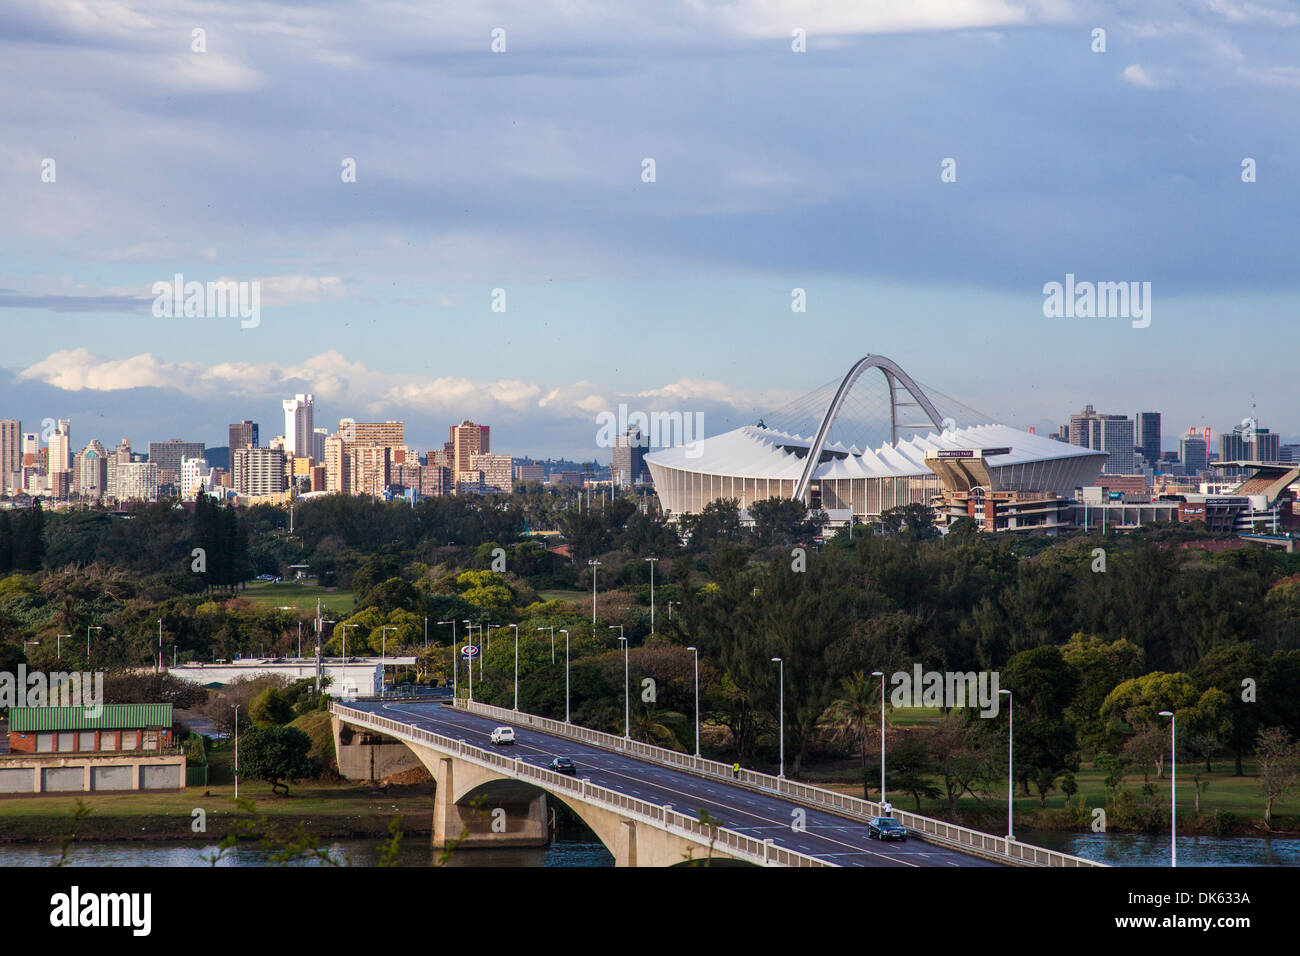 Durban city skyline and the Moses Mabhida Stadium in the foreground Stock Photo